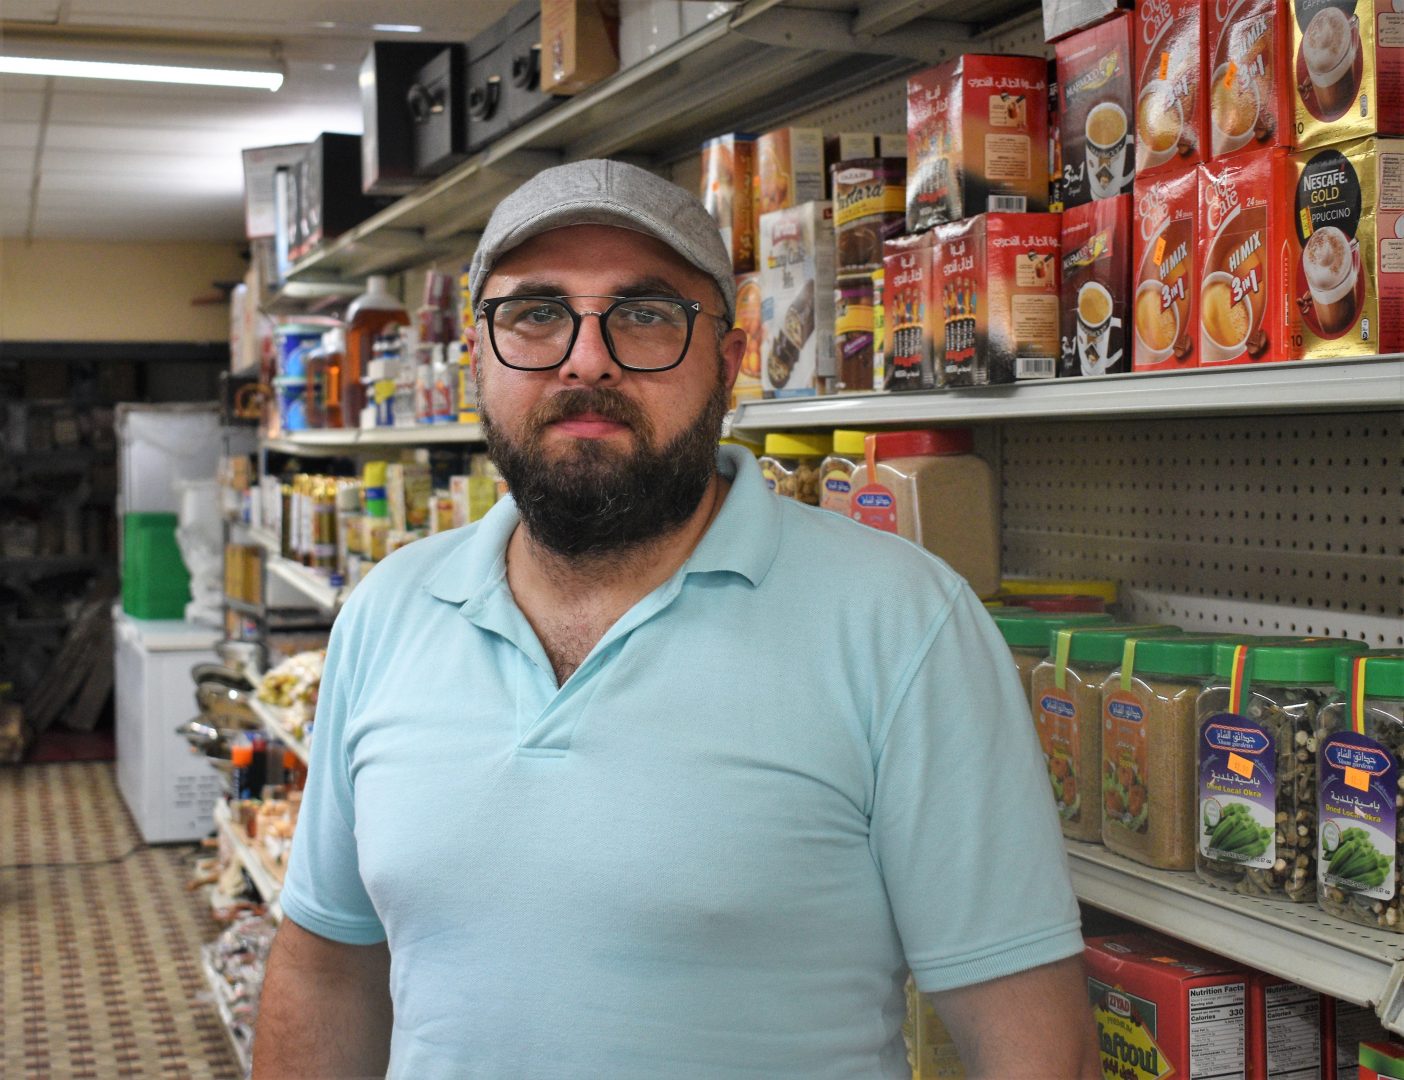 Bassam Dabbah, who entered the United States as a refuge from Syria, opened Sham Market in Erie in 2017.